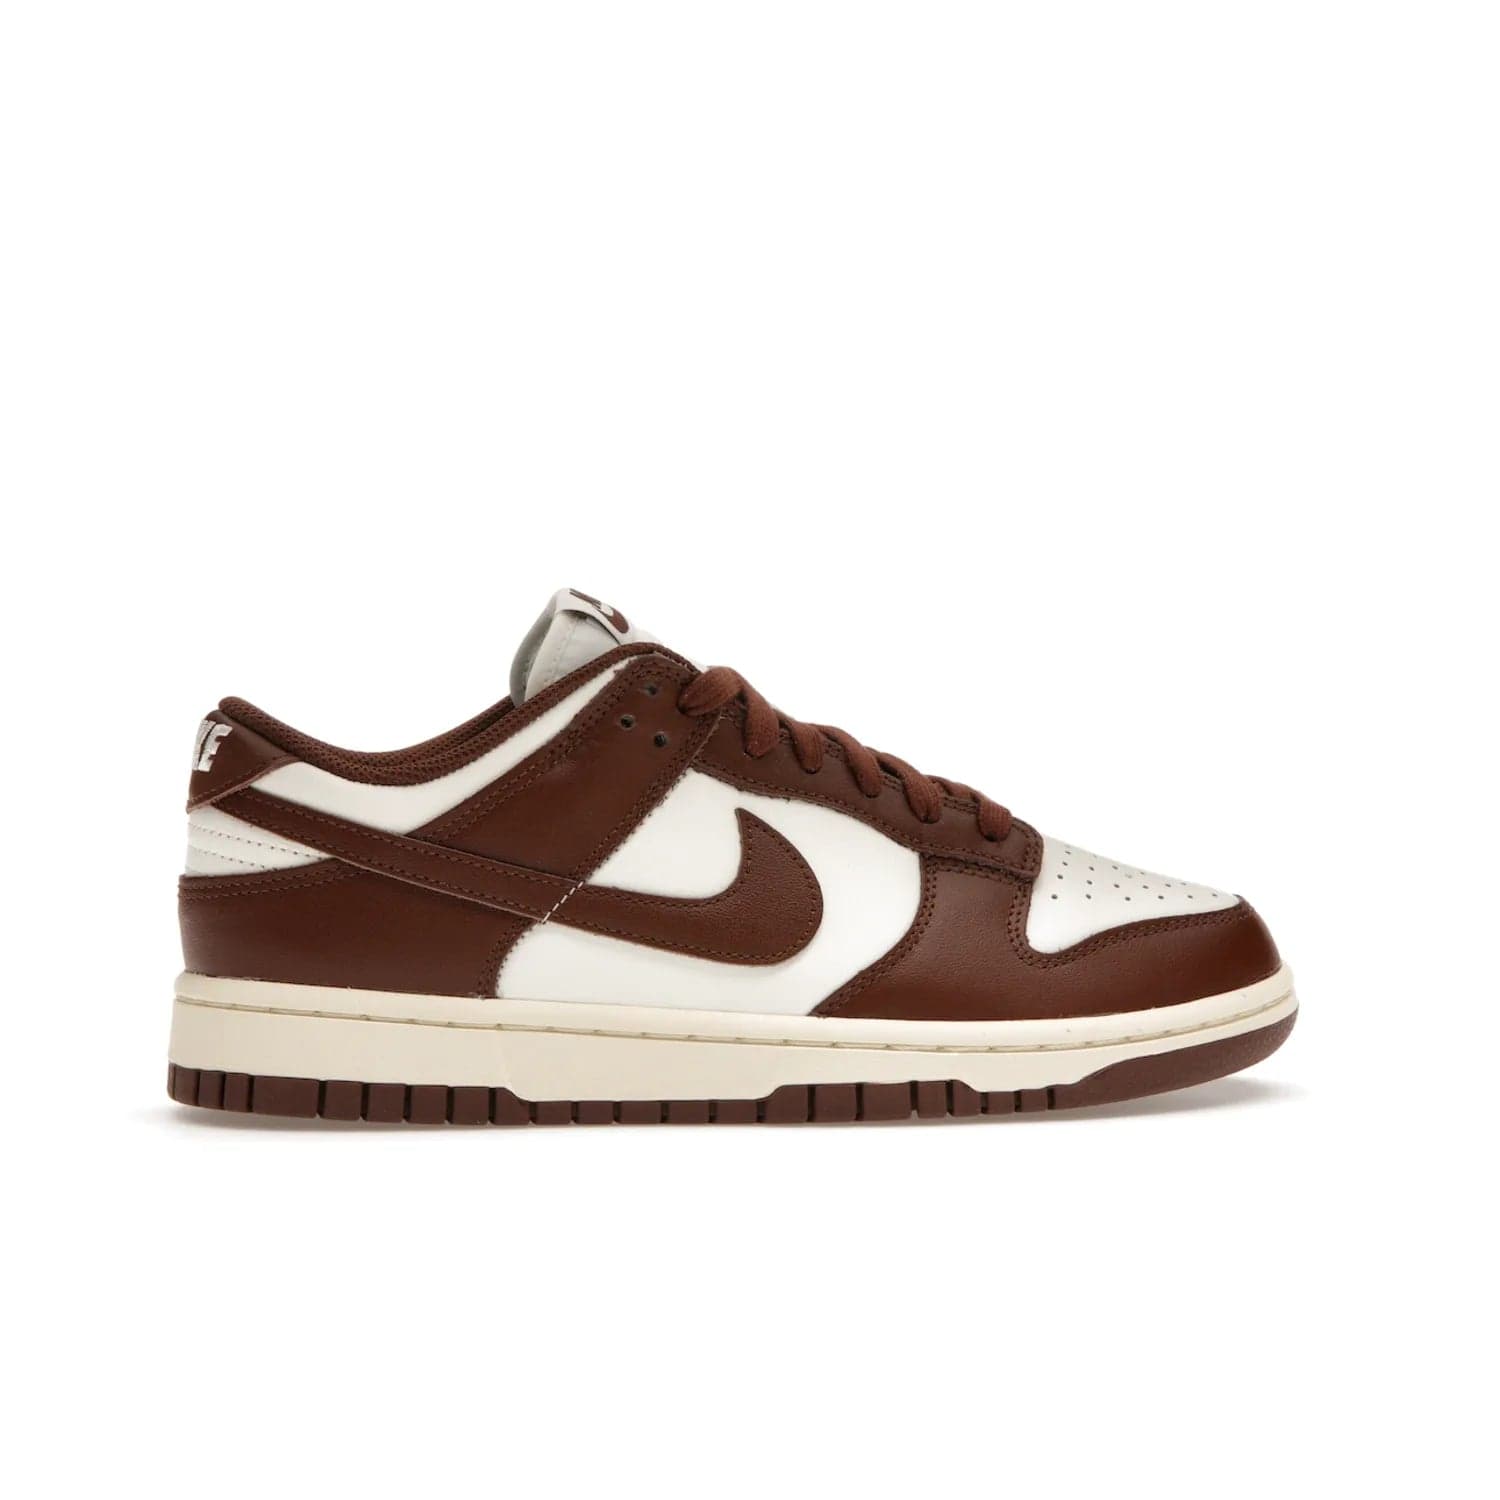 Nike Dunk Low Cacao Wow (Women's) - Image 36 - Only at www.BallersClubKickz.com - Revised
Get the Nike Dunk Low Cacao Wow and make a statement! Plush leather and a cool Cacao Wow finish bring together a unique mix of comfort and fashion that will turn heads. Boosted with a Coconut Milk hue. Shop today.